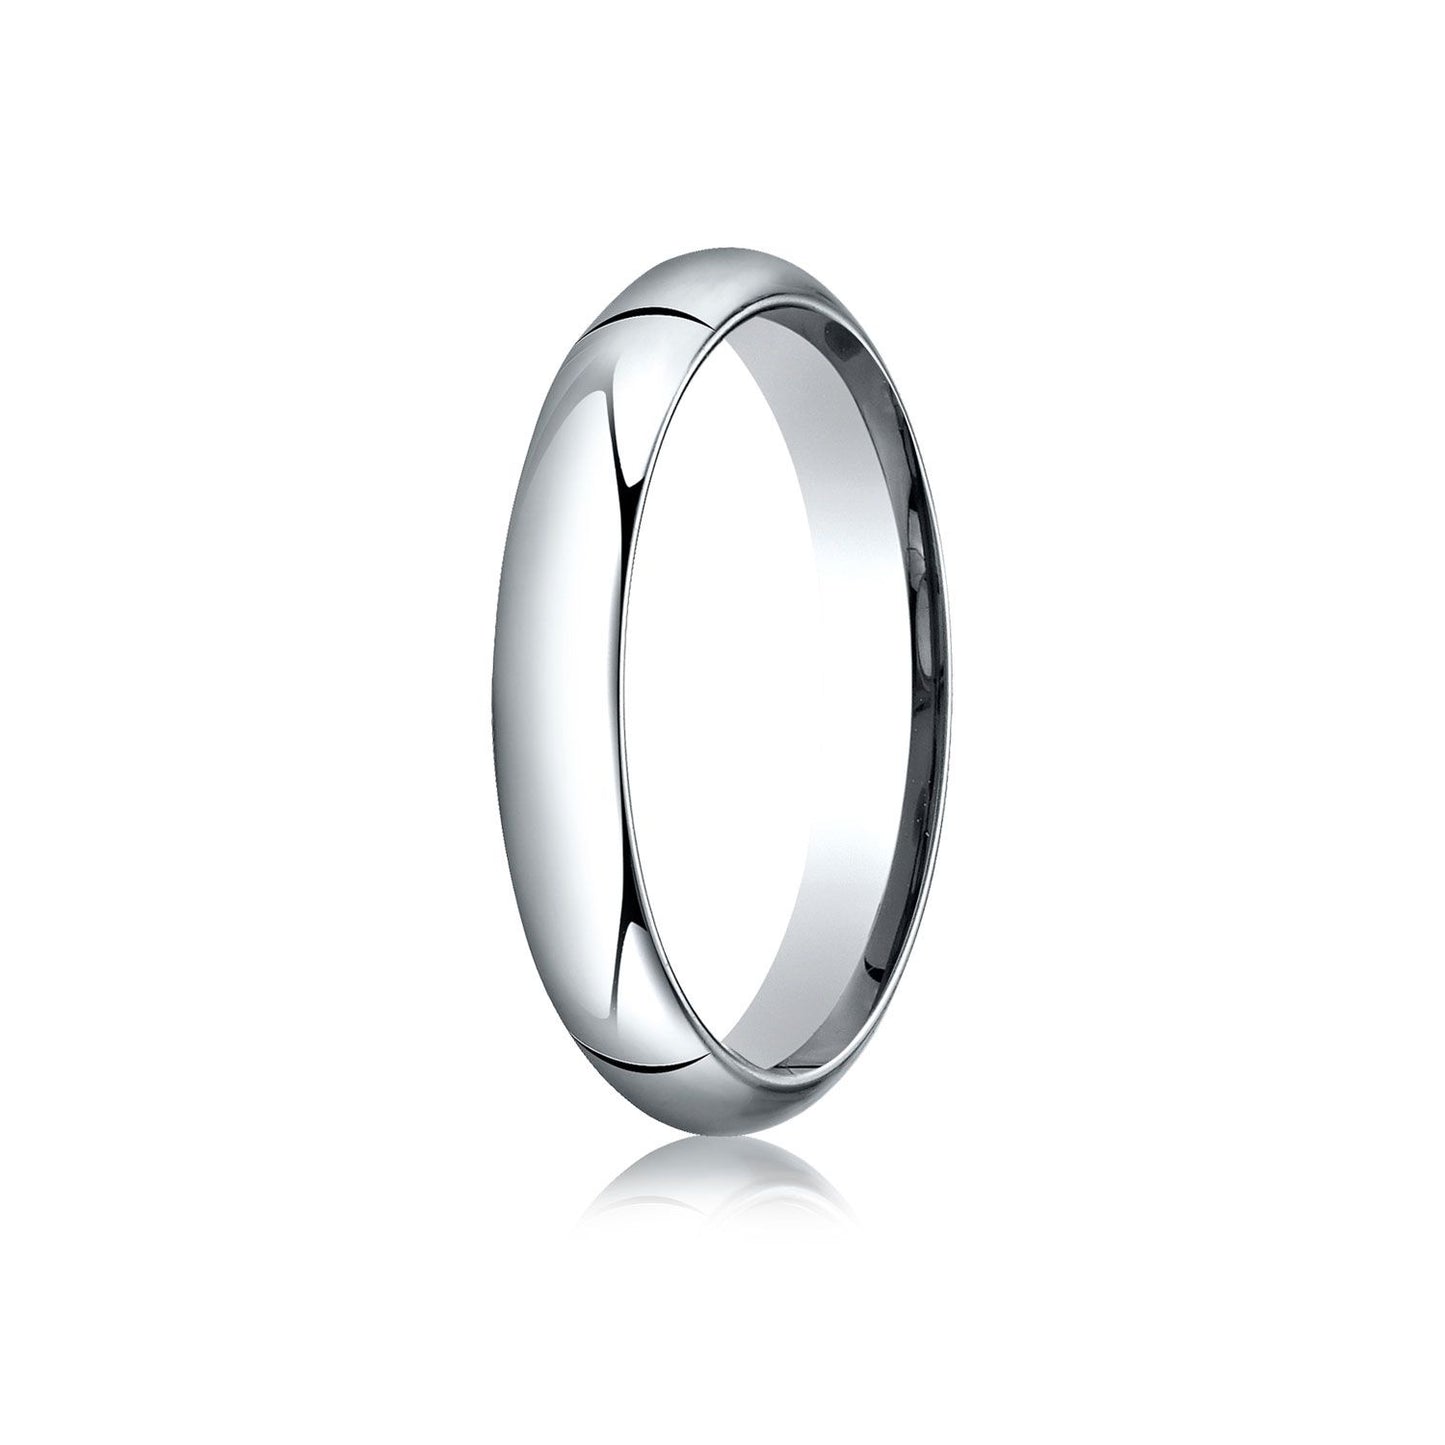 Platinum 4mm High Dome Comfort-fit Ring